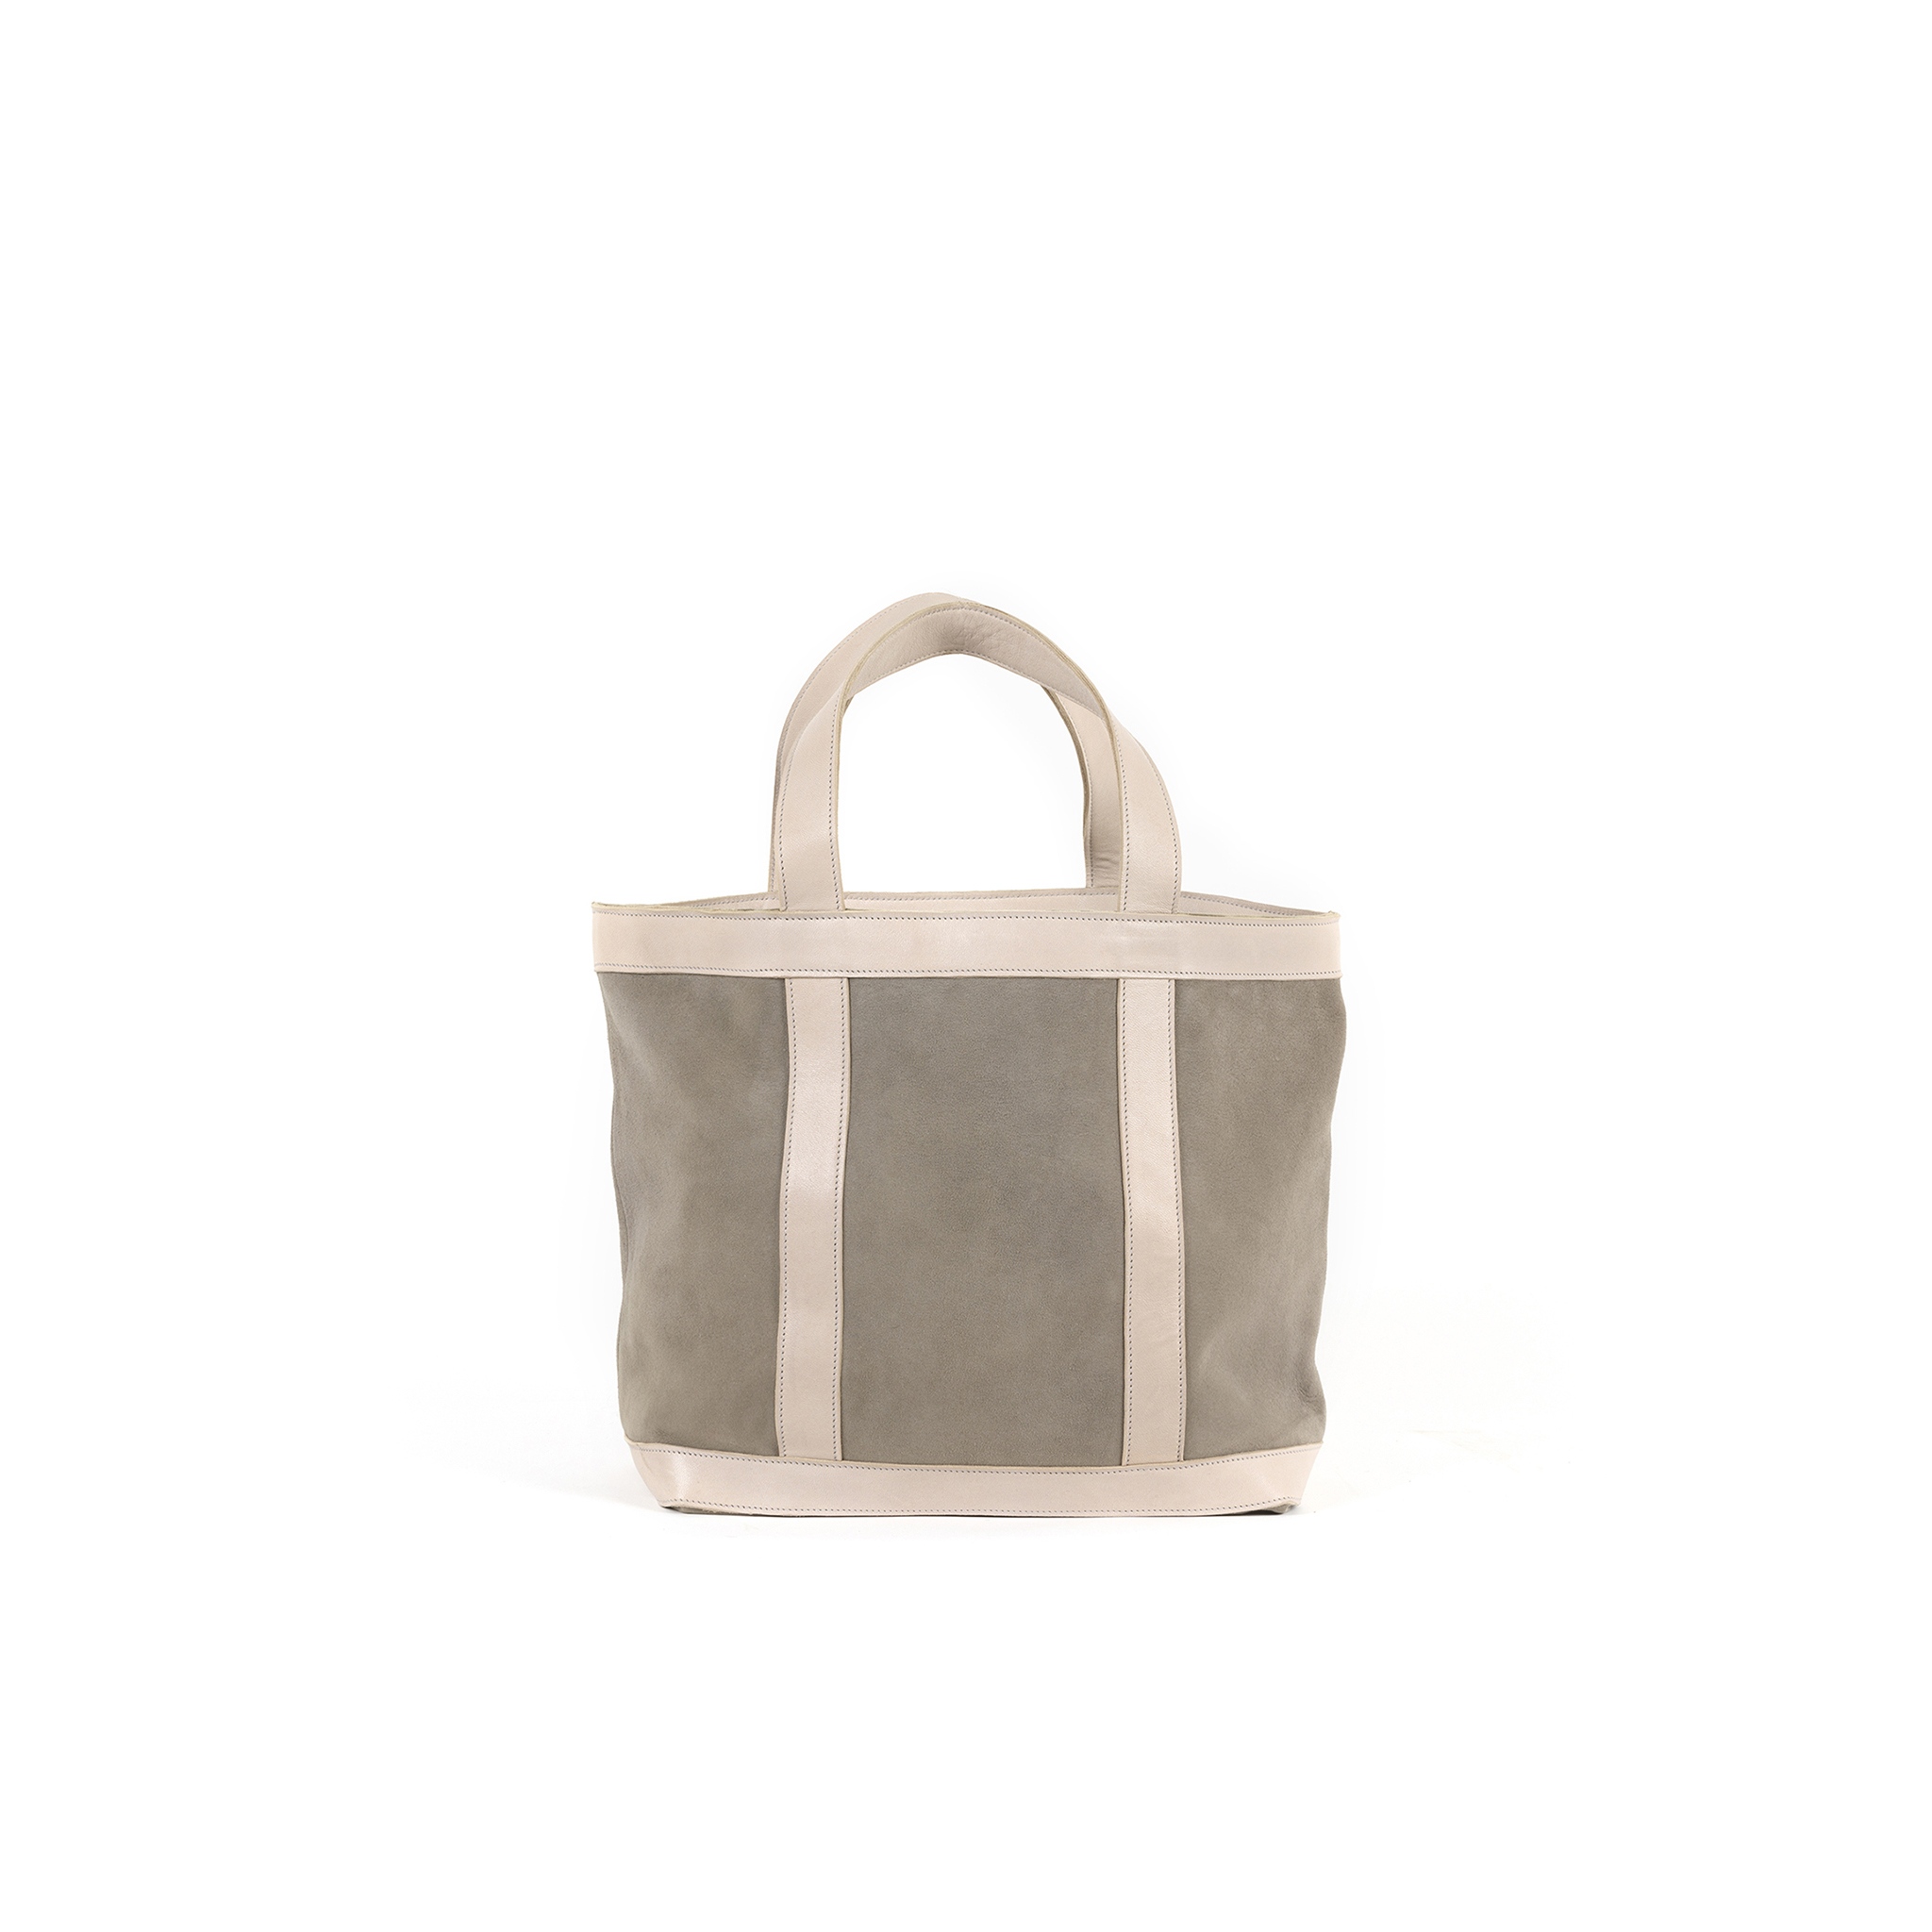 Shopping Bag - Glossy and suede leather - Grey color